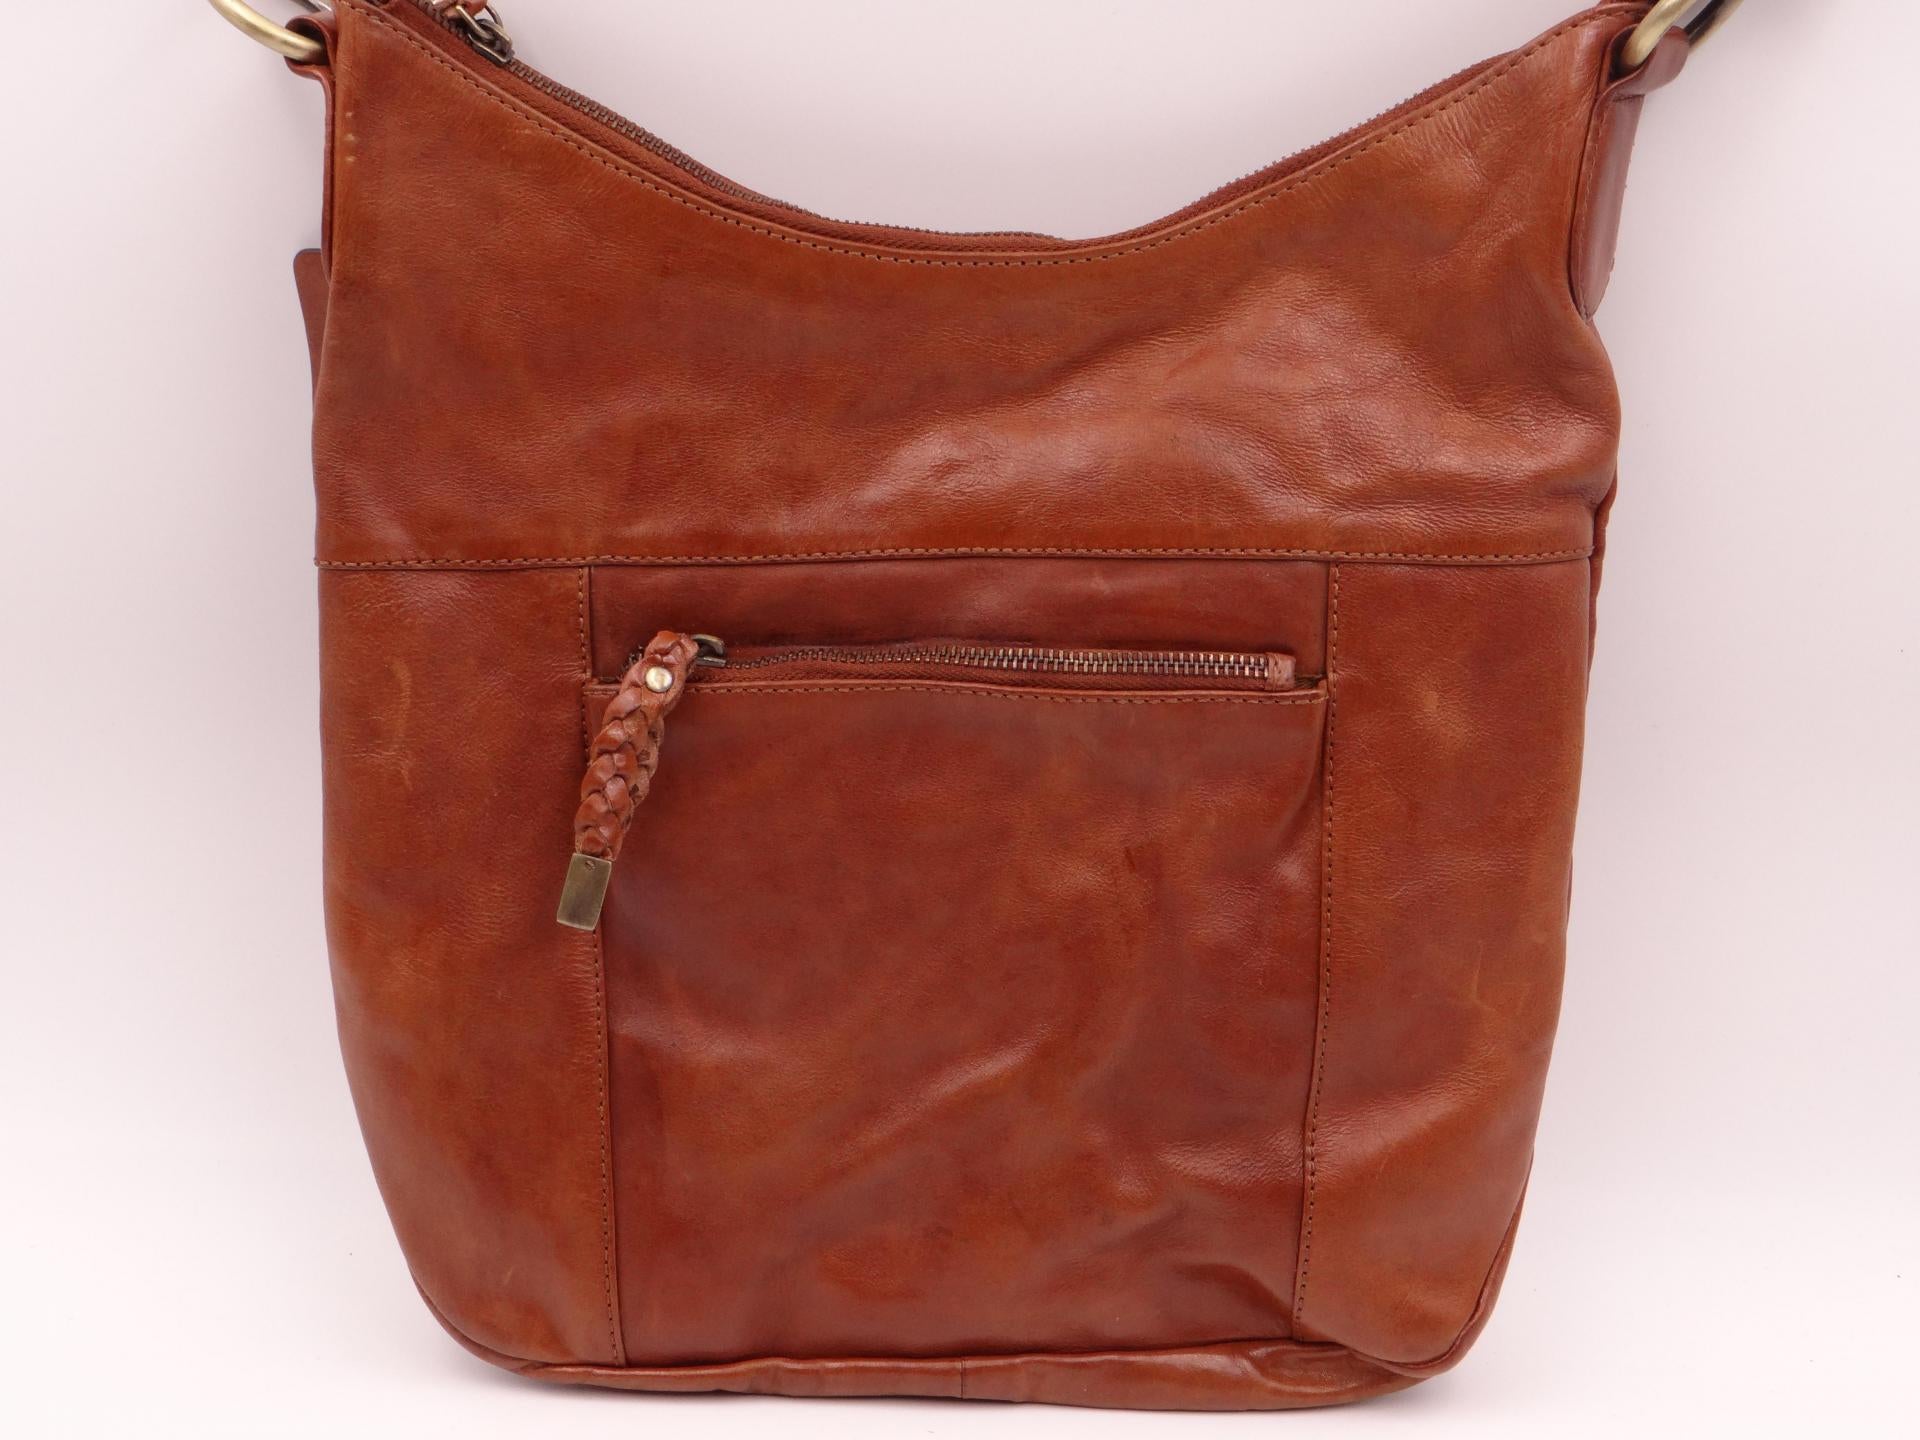 Leather Woven Cross Body Camera Bag | M&S NZ